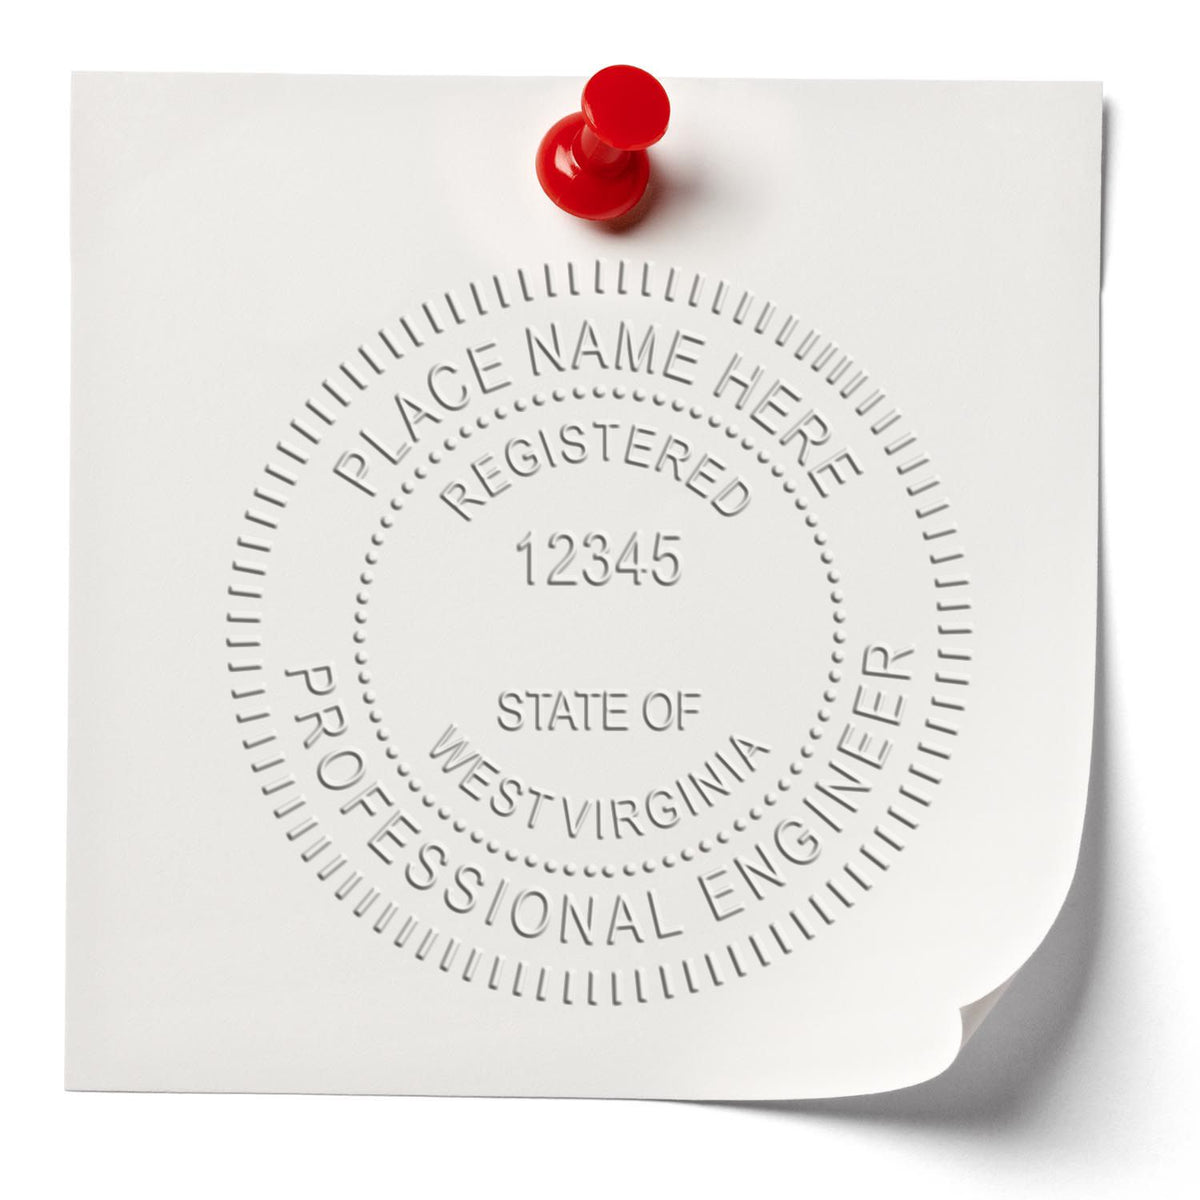 A photograph of the Soft West Virginia Professional Engineer Seal stamp impression reveals a vivid, professional image of the on paper.